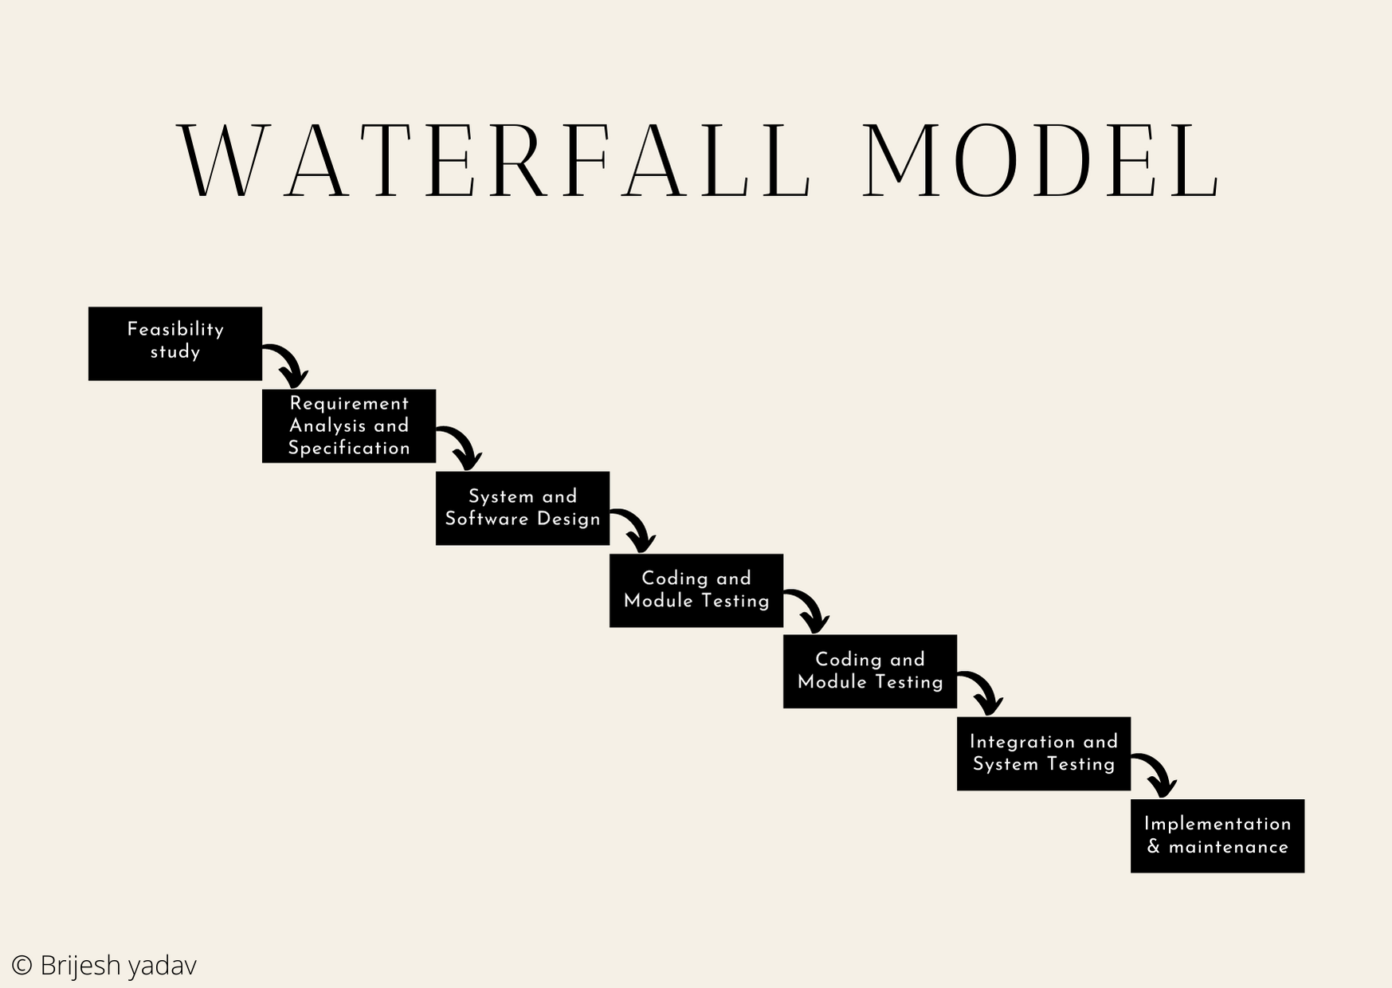 Waterfall model - Different phases, advantages, and disadvantages